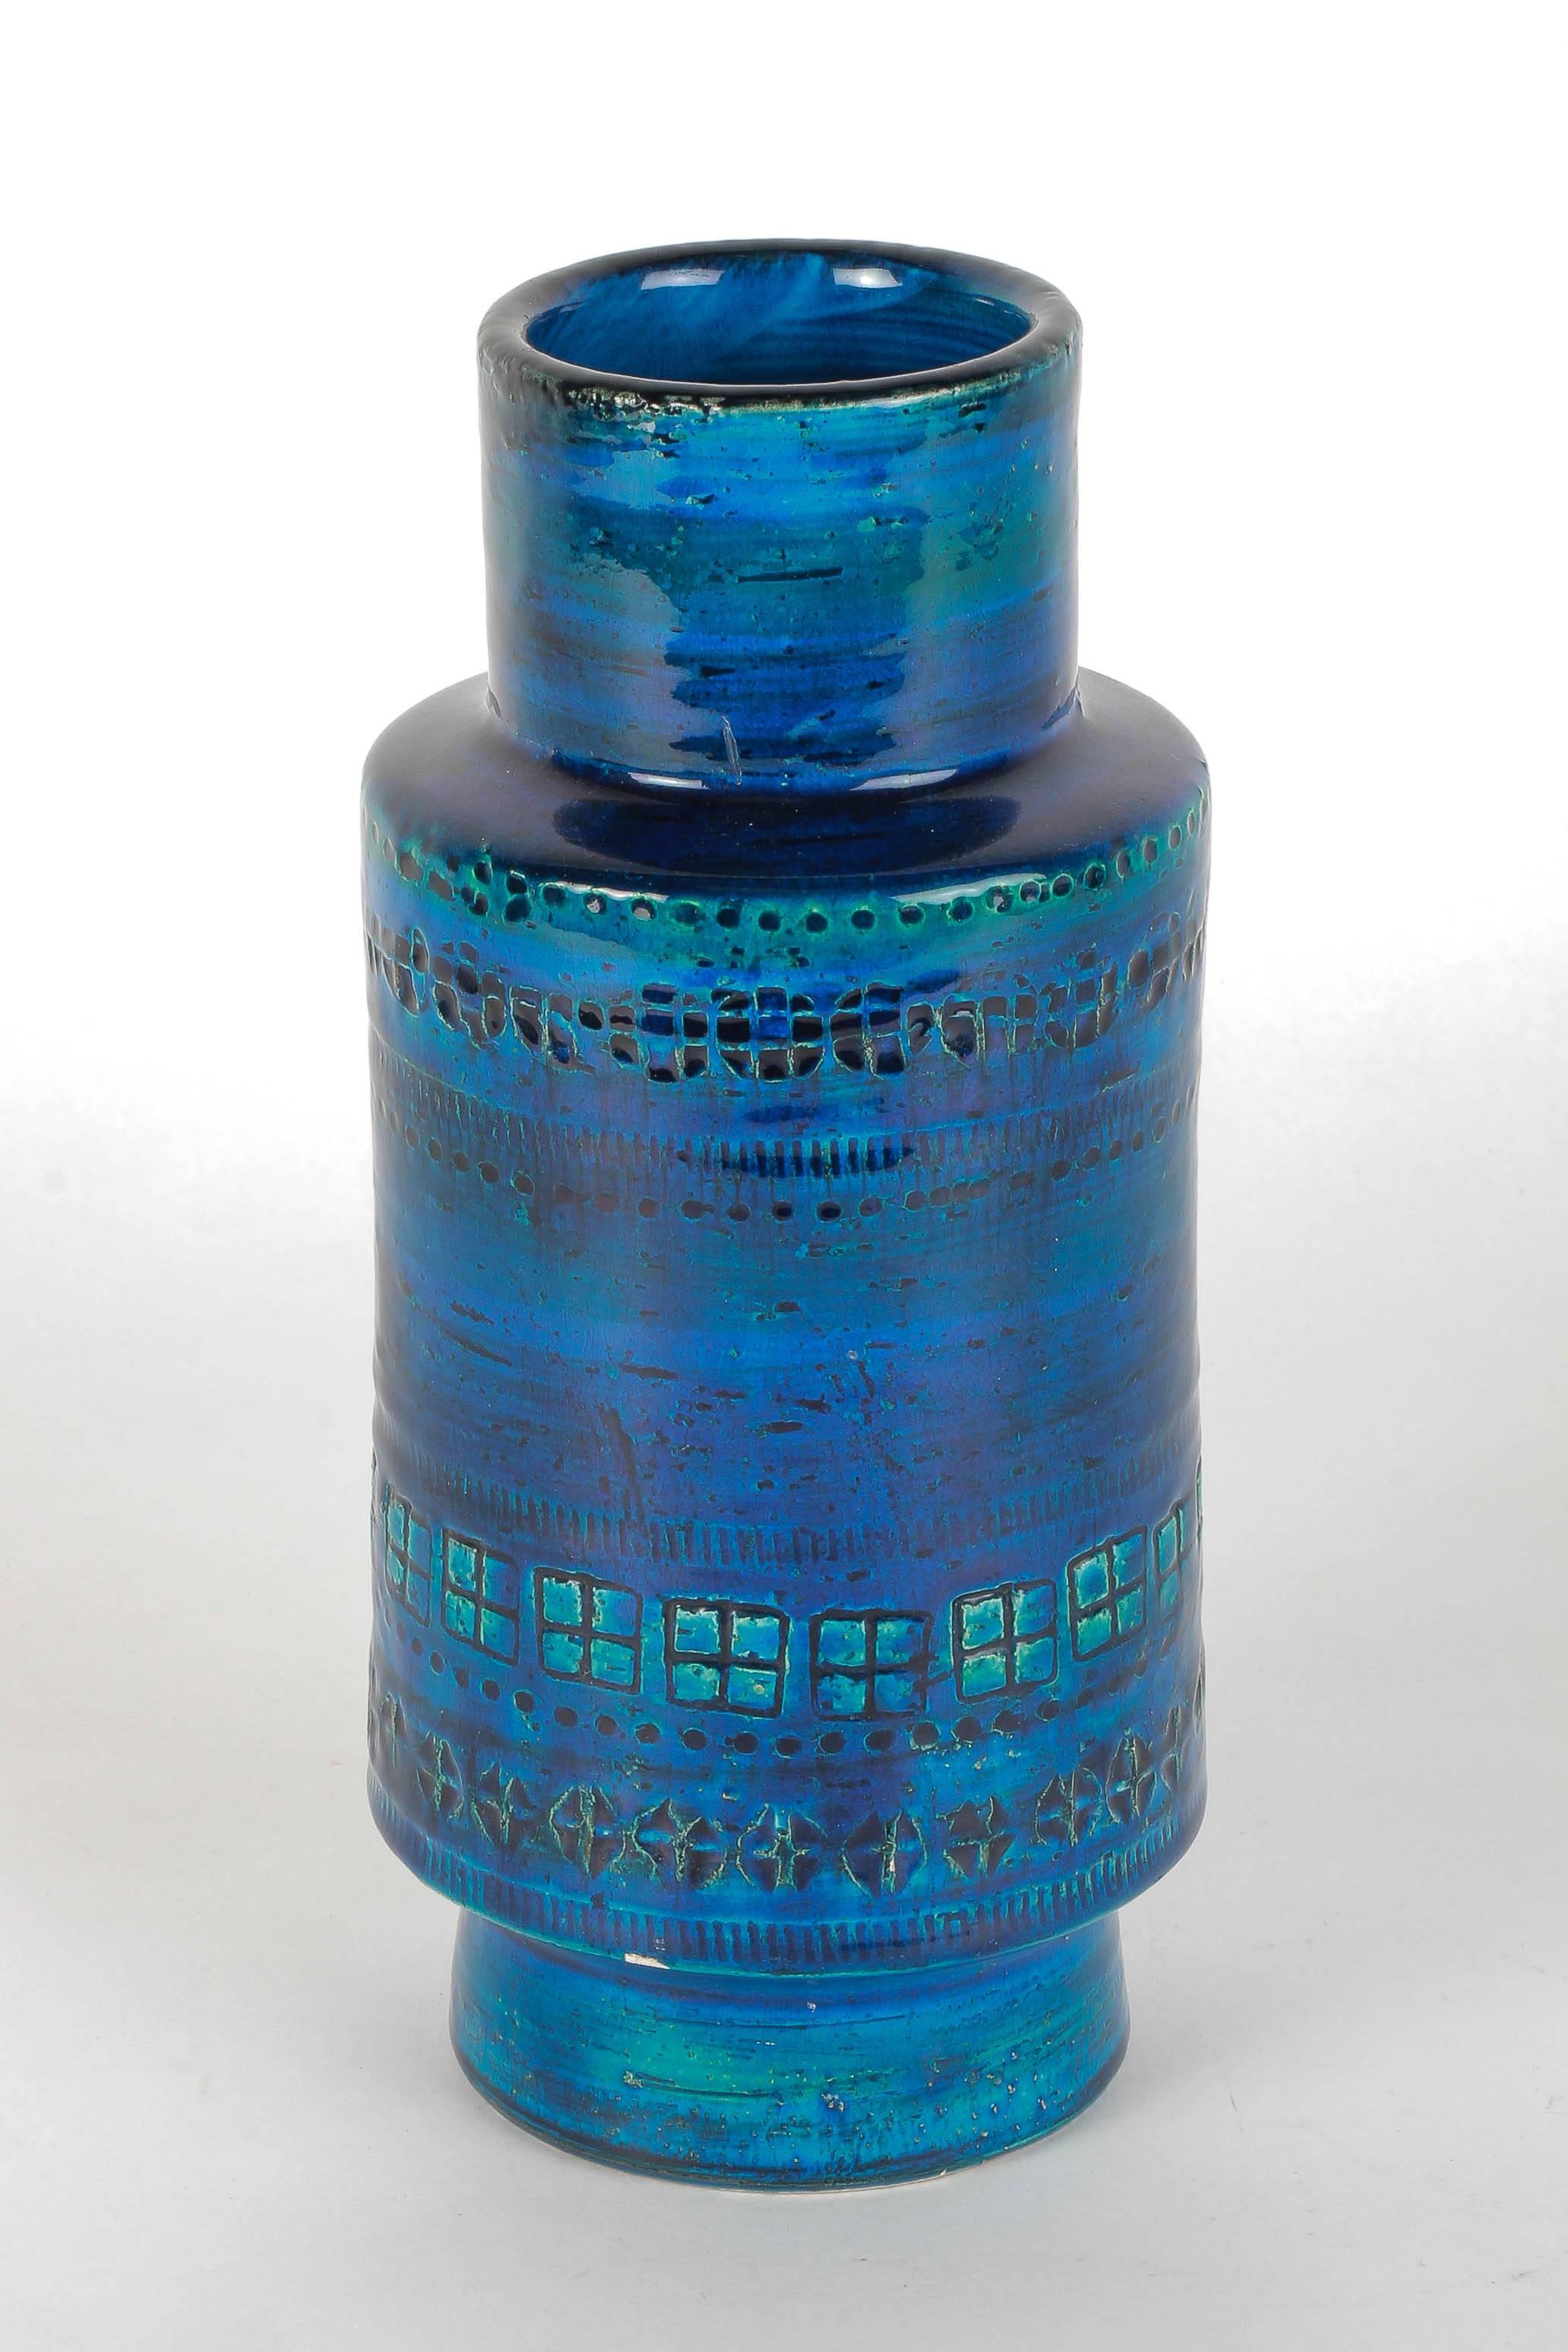 Aldo Londi vase manufactured by Bitossi in Italy in the 1950s. Vase of the famous Rimini Blu series that includes over 150 different designs. Characteristic pattern in vibrant blue colors.